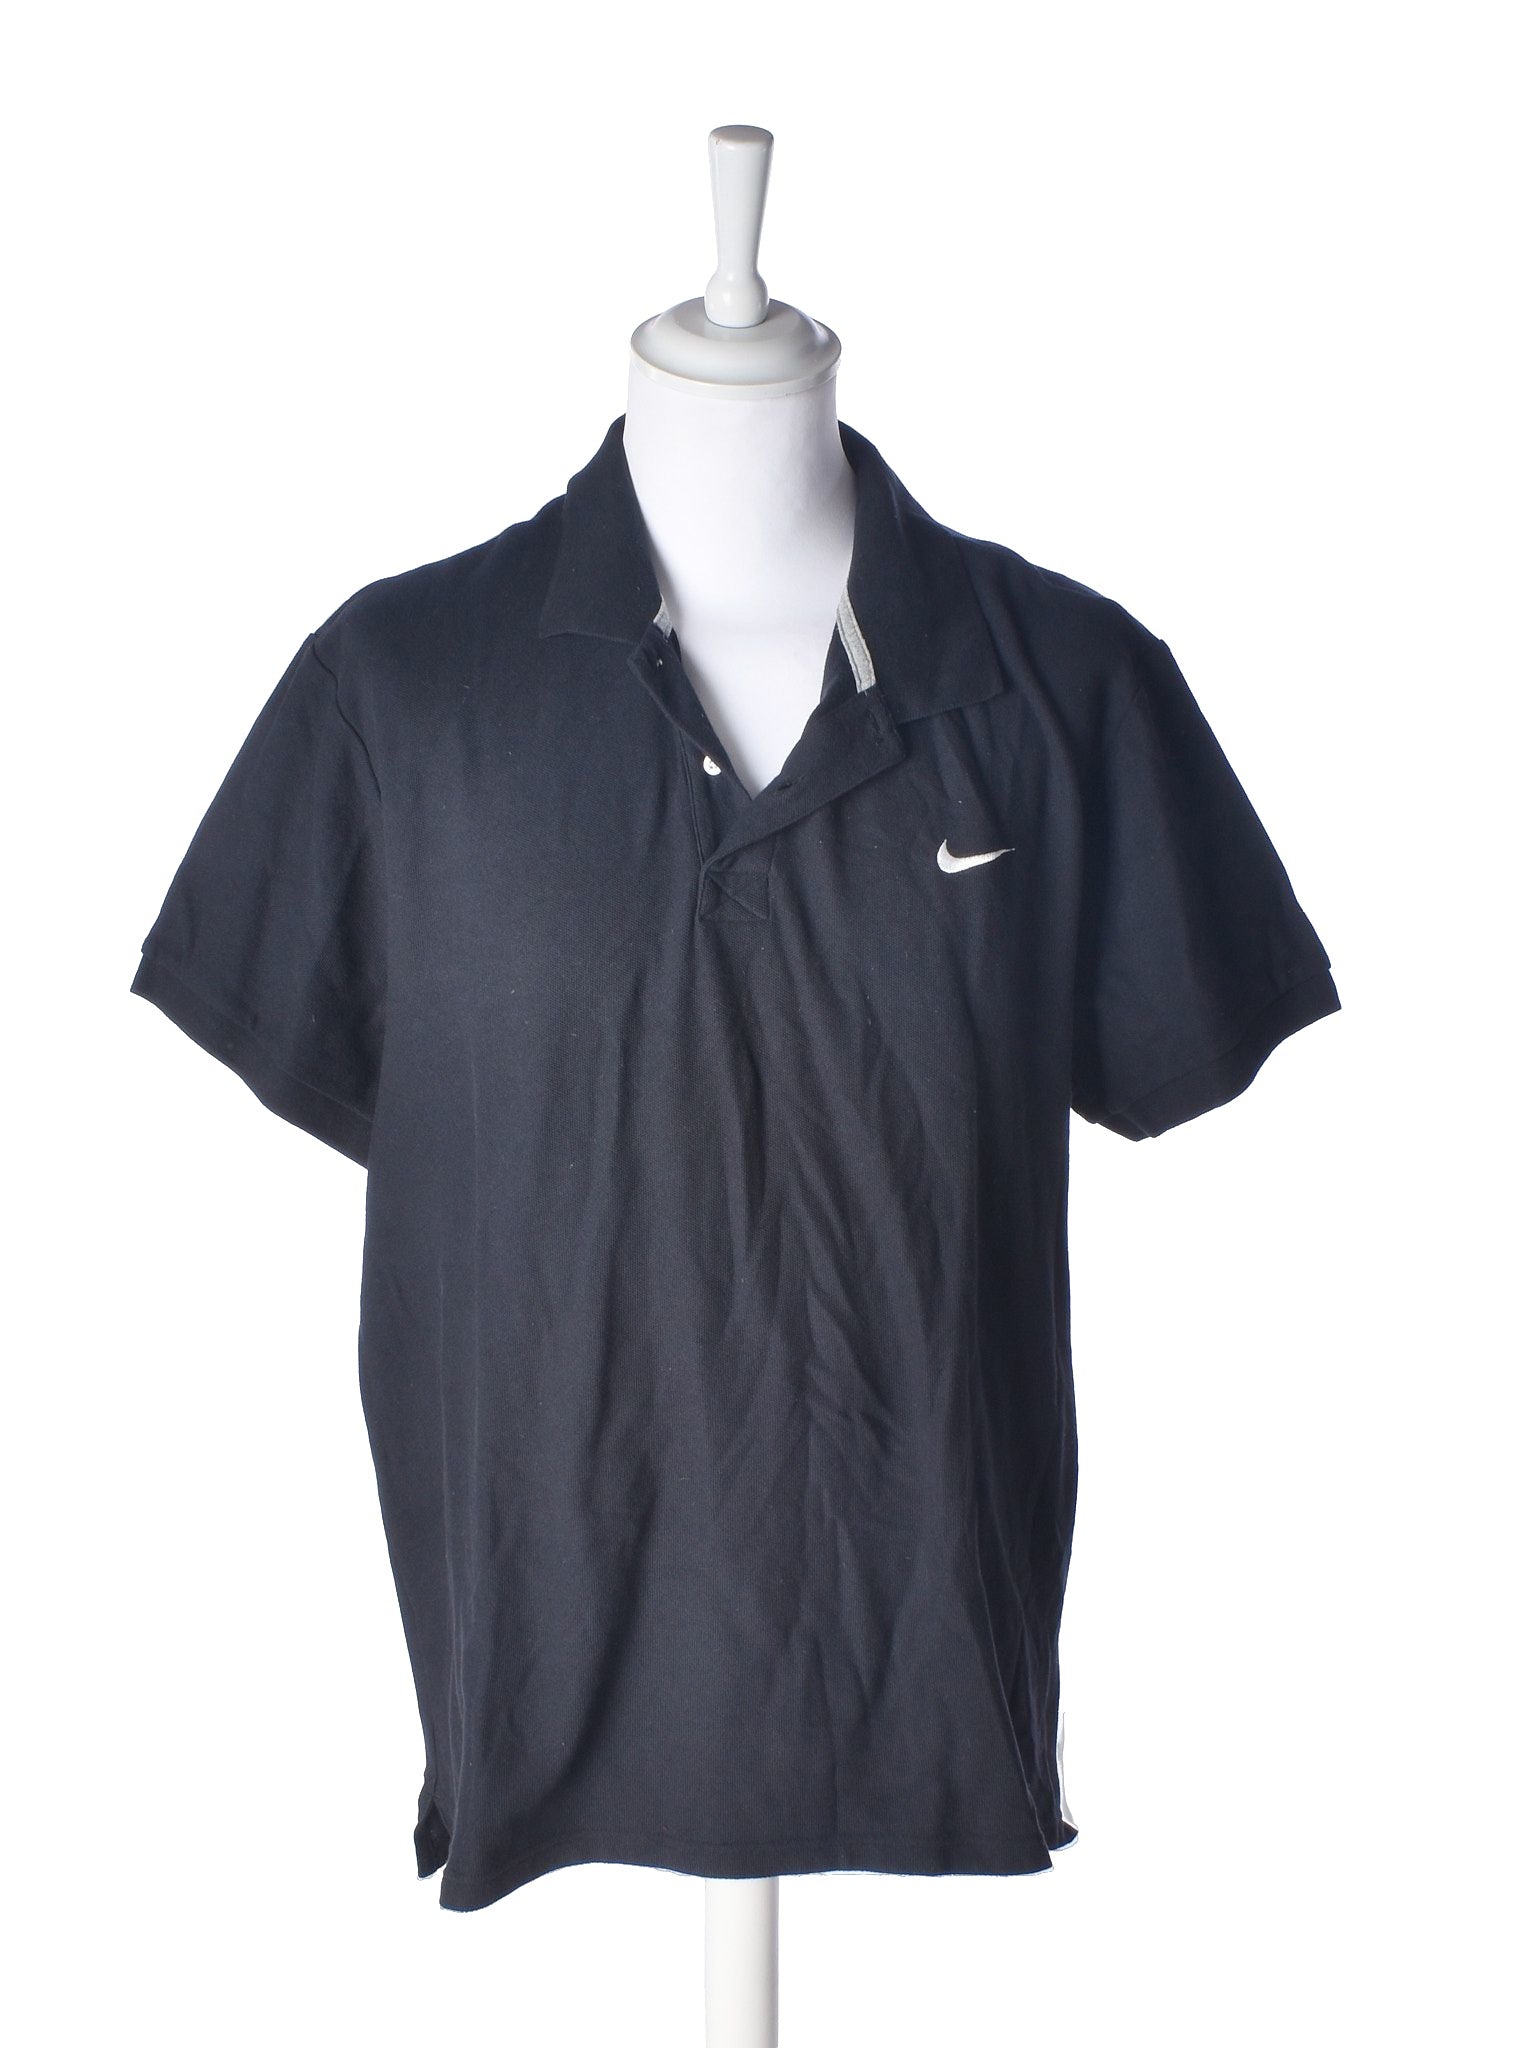 Secondhand - Nike - Mand - Polo - XXL / Sort